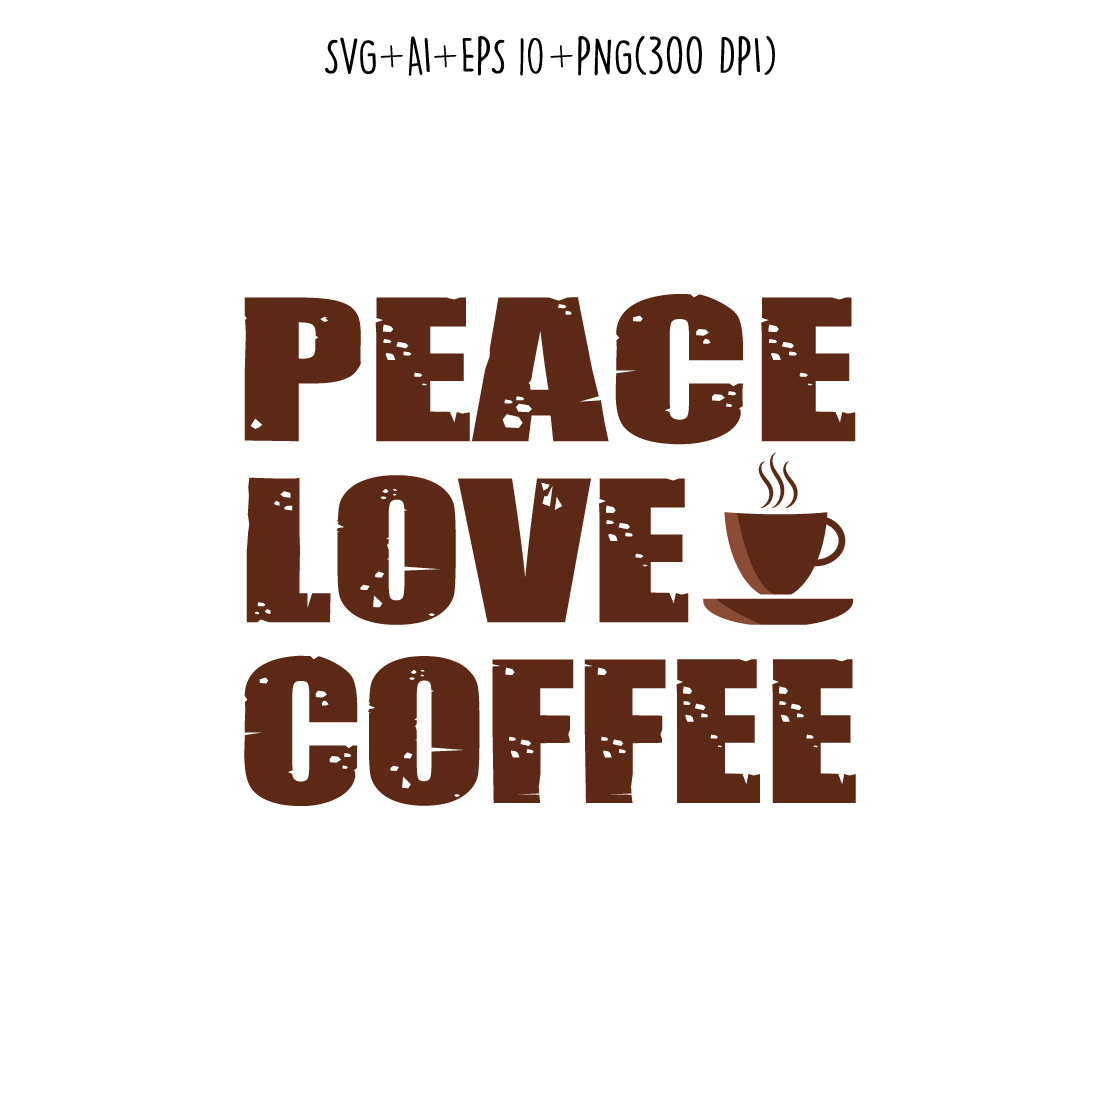 Peace love coffee typography for t-shirts, print, templates, logos, mug preview image.